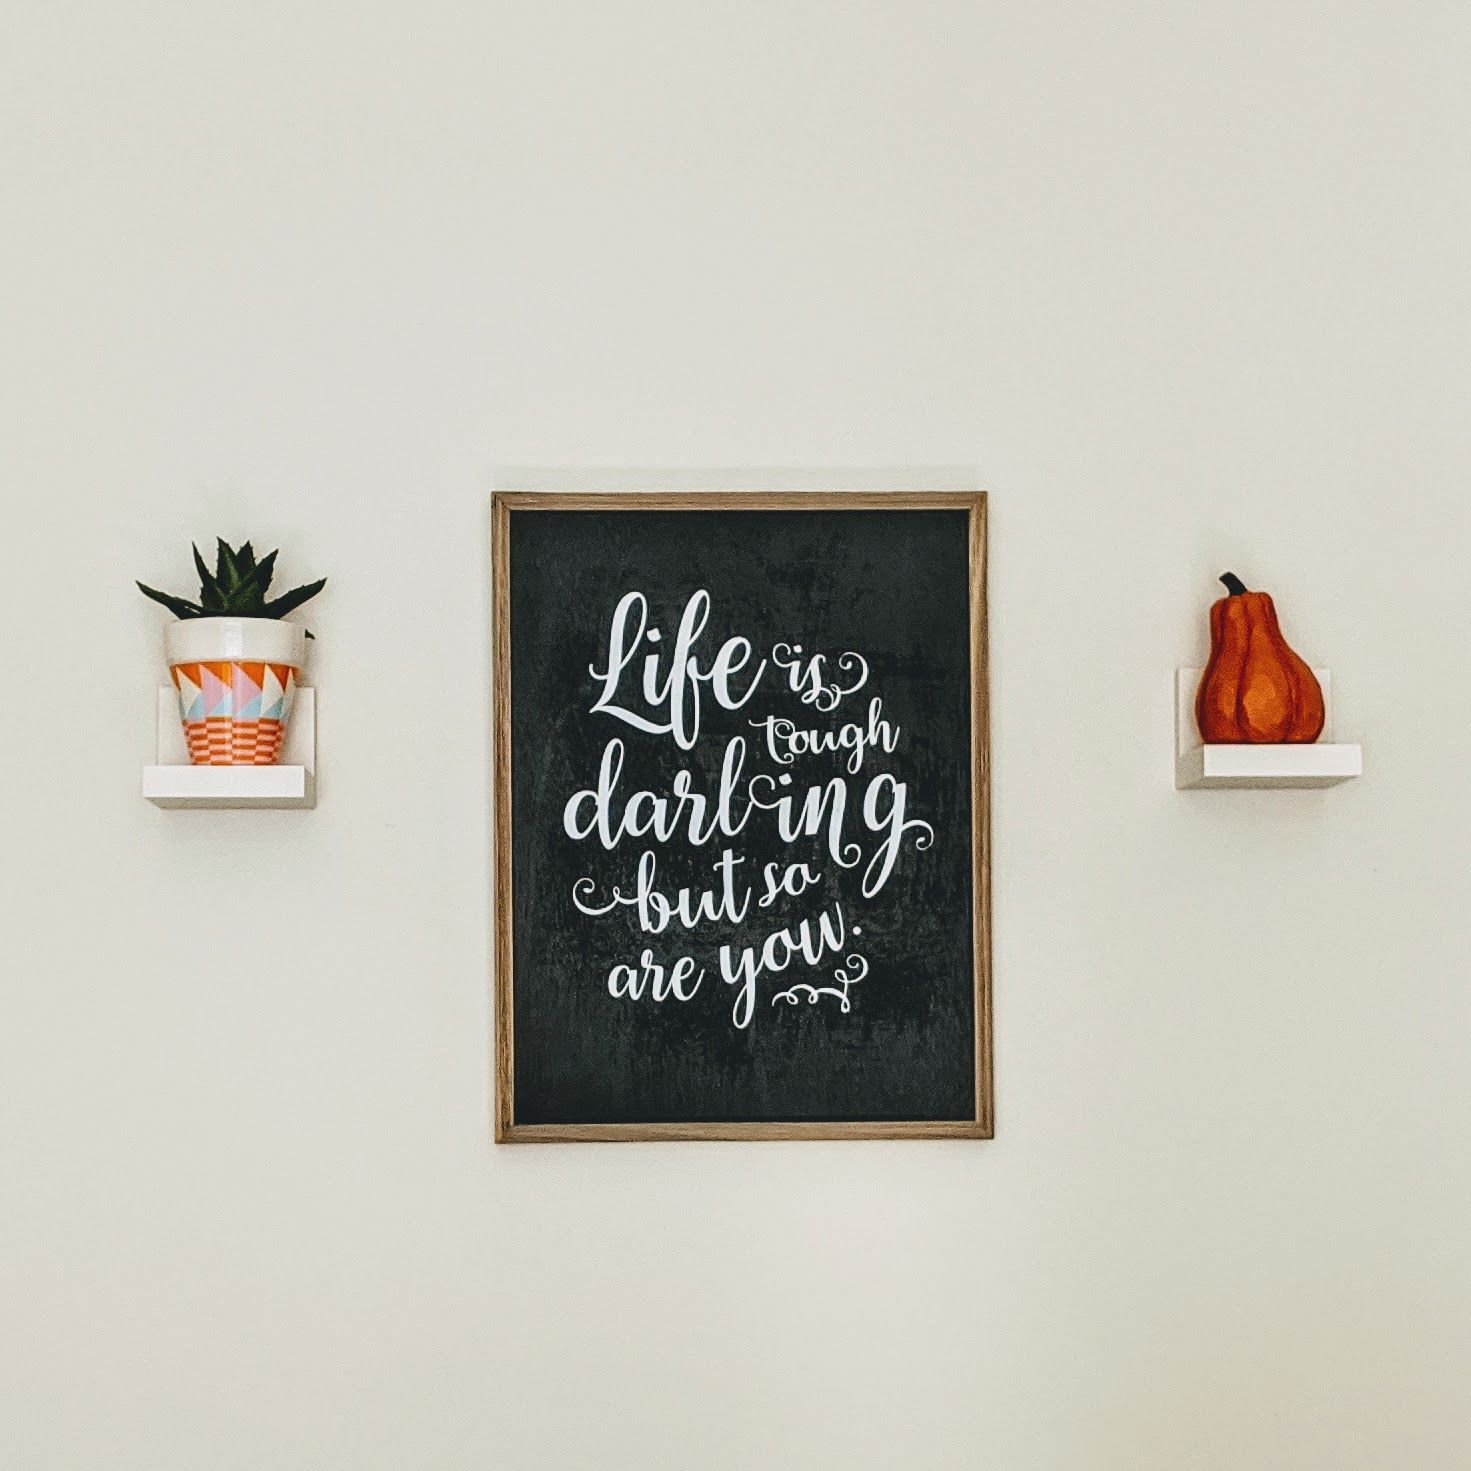 Image of Ott Counseling Office wall, with a quote framed 